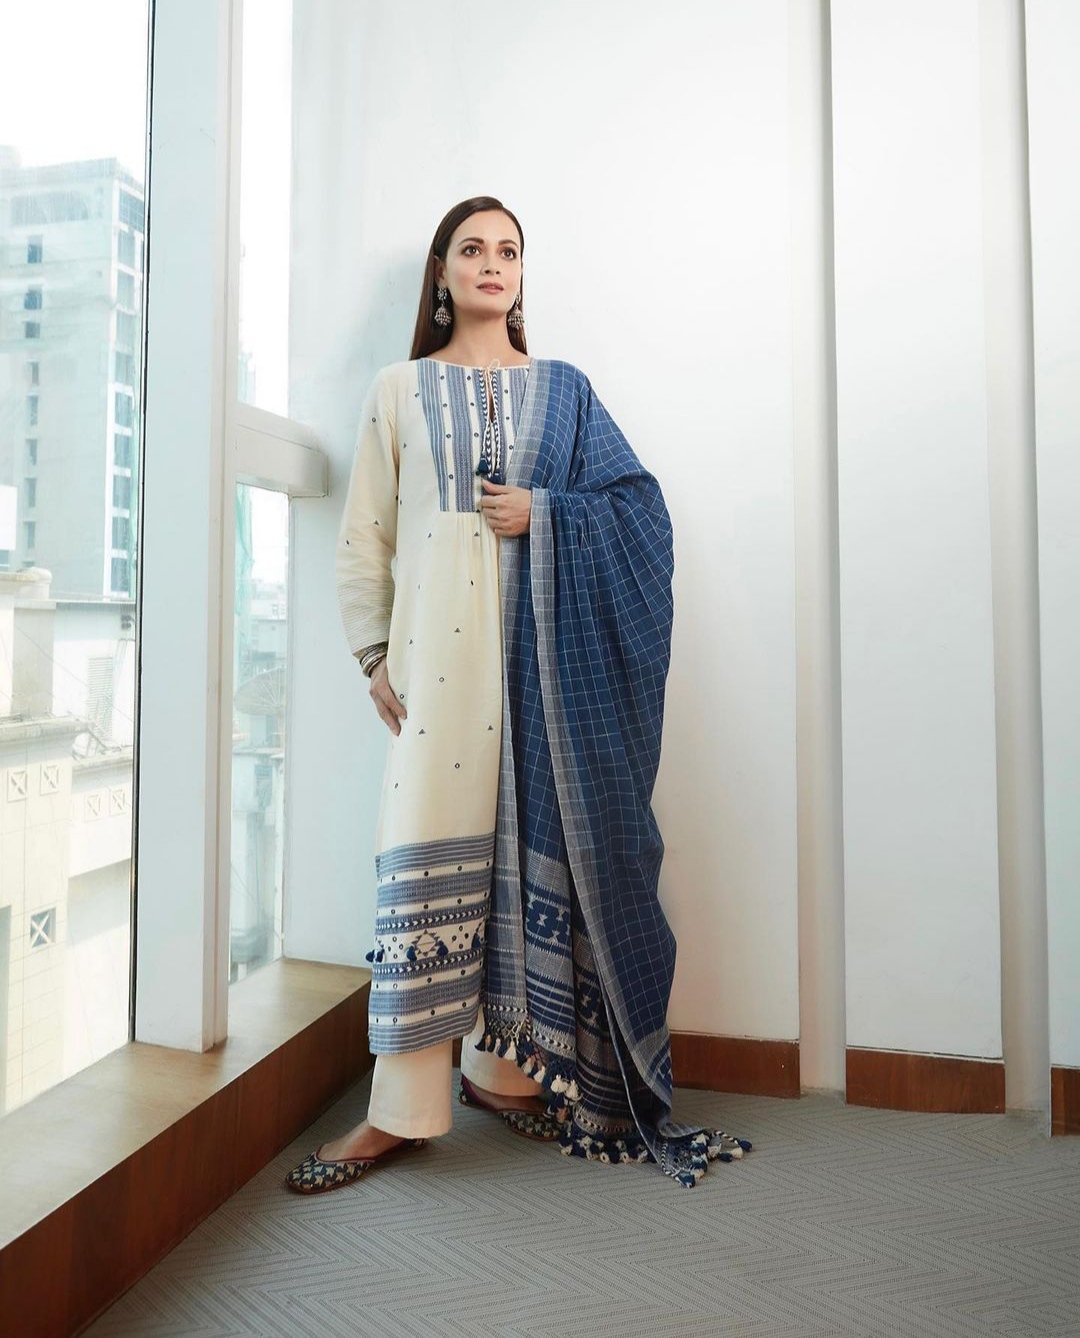 Dia Mirza Outfit